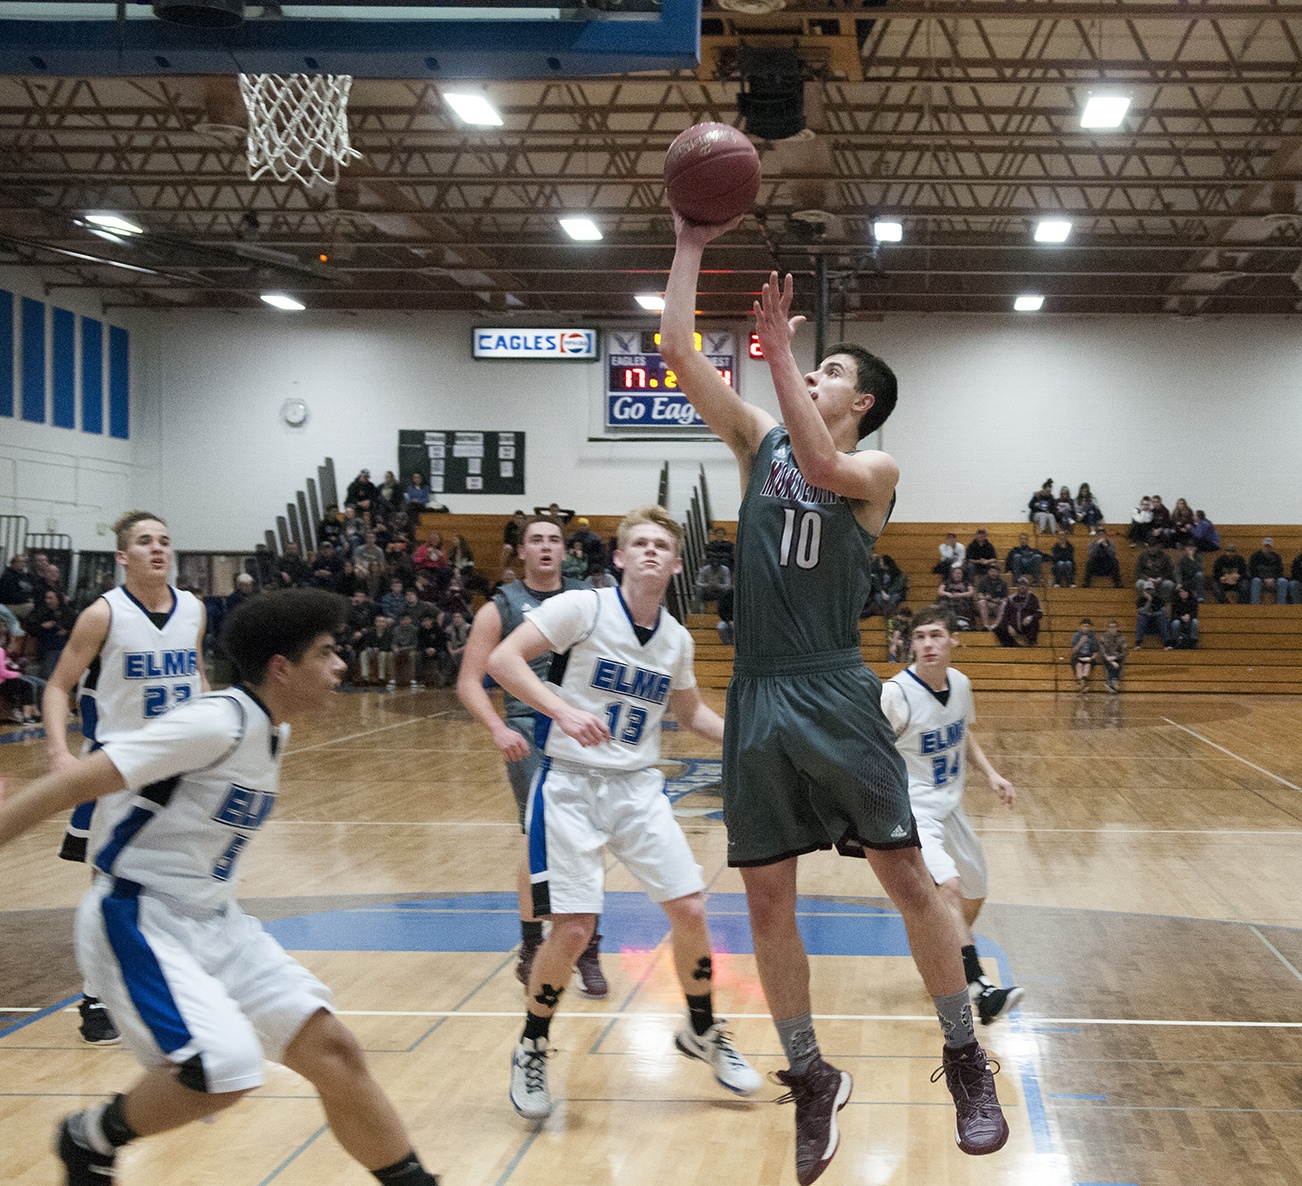 Montesano grinds out a 59-52 win over rival Elma